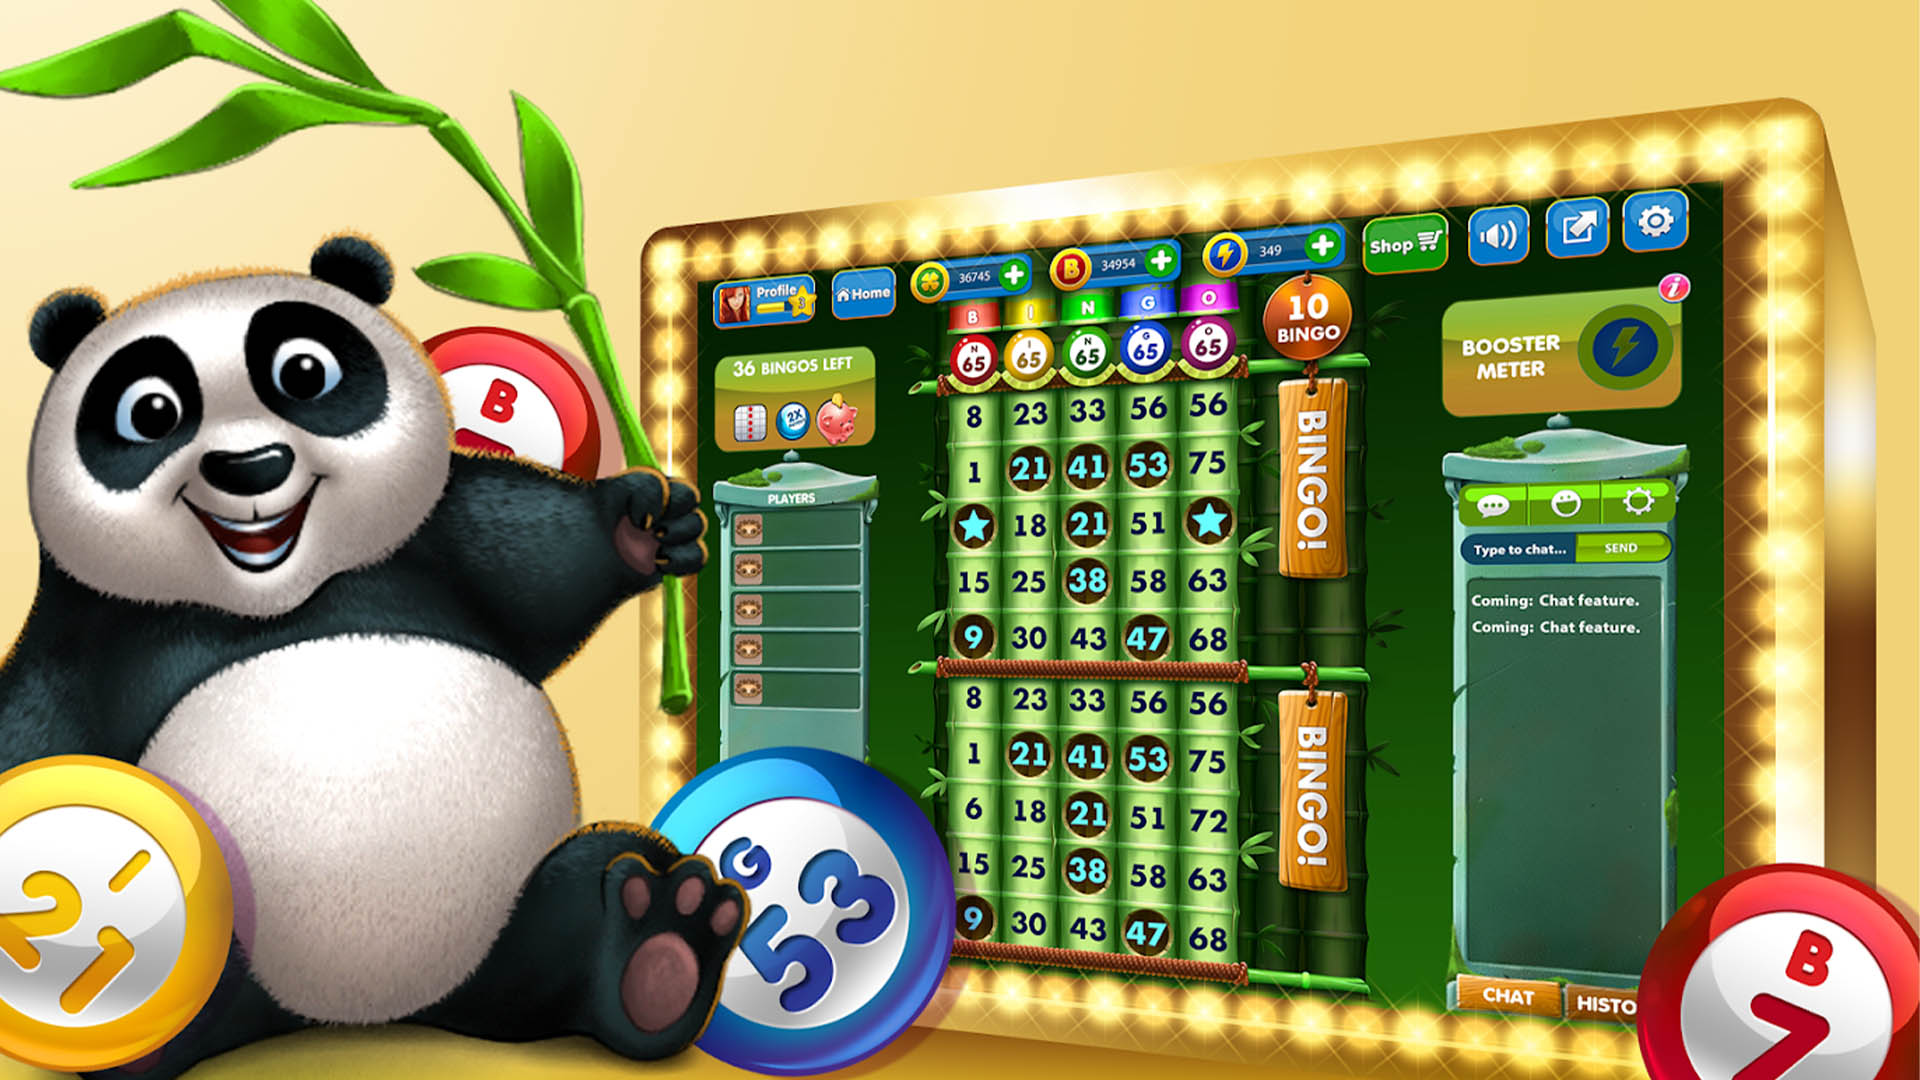 Absolute Bingo Game for Android - Download